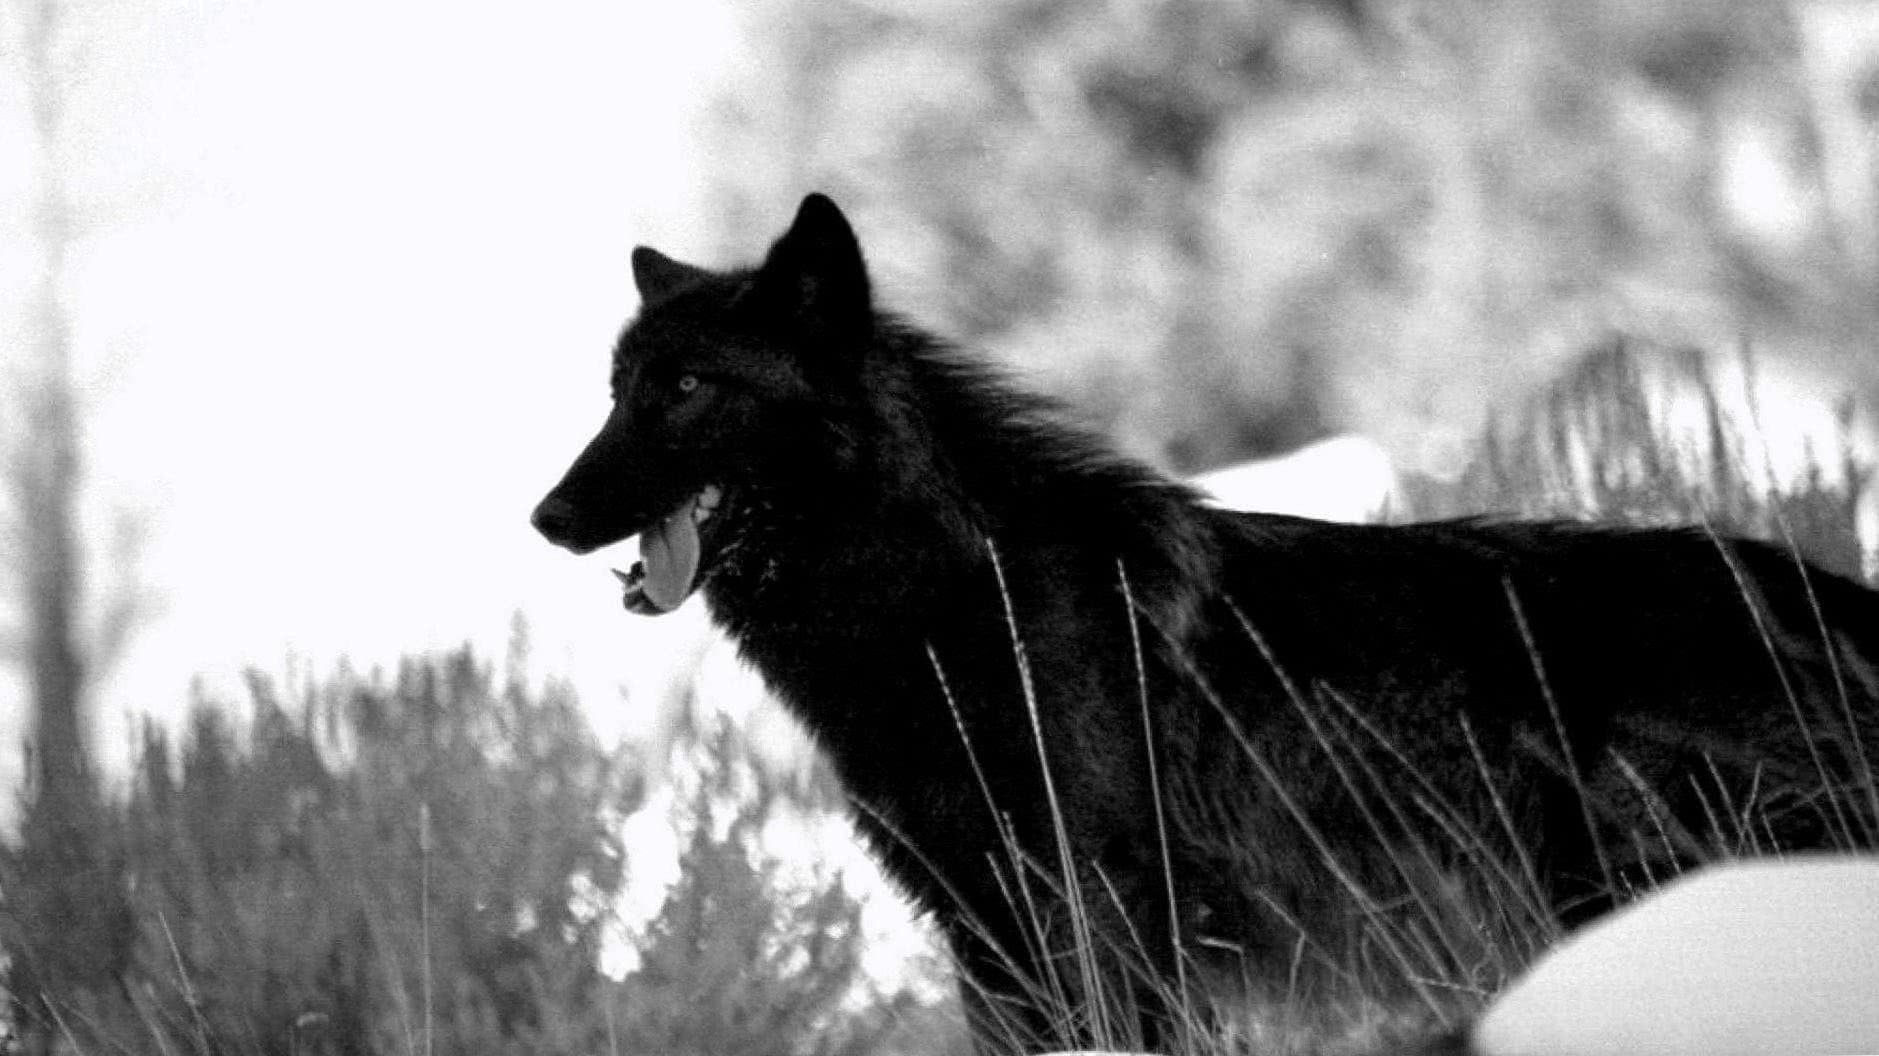 HD Wallpapers Black Wolf